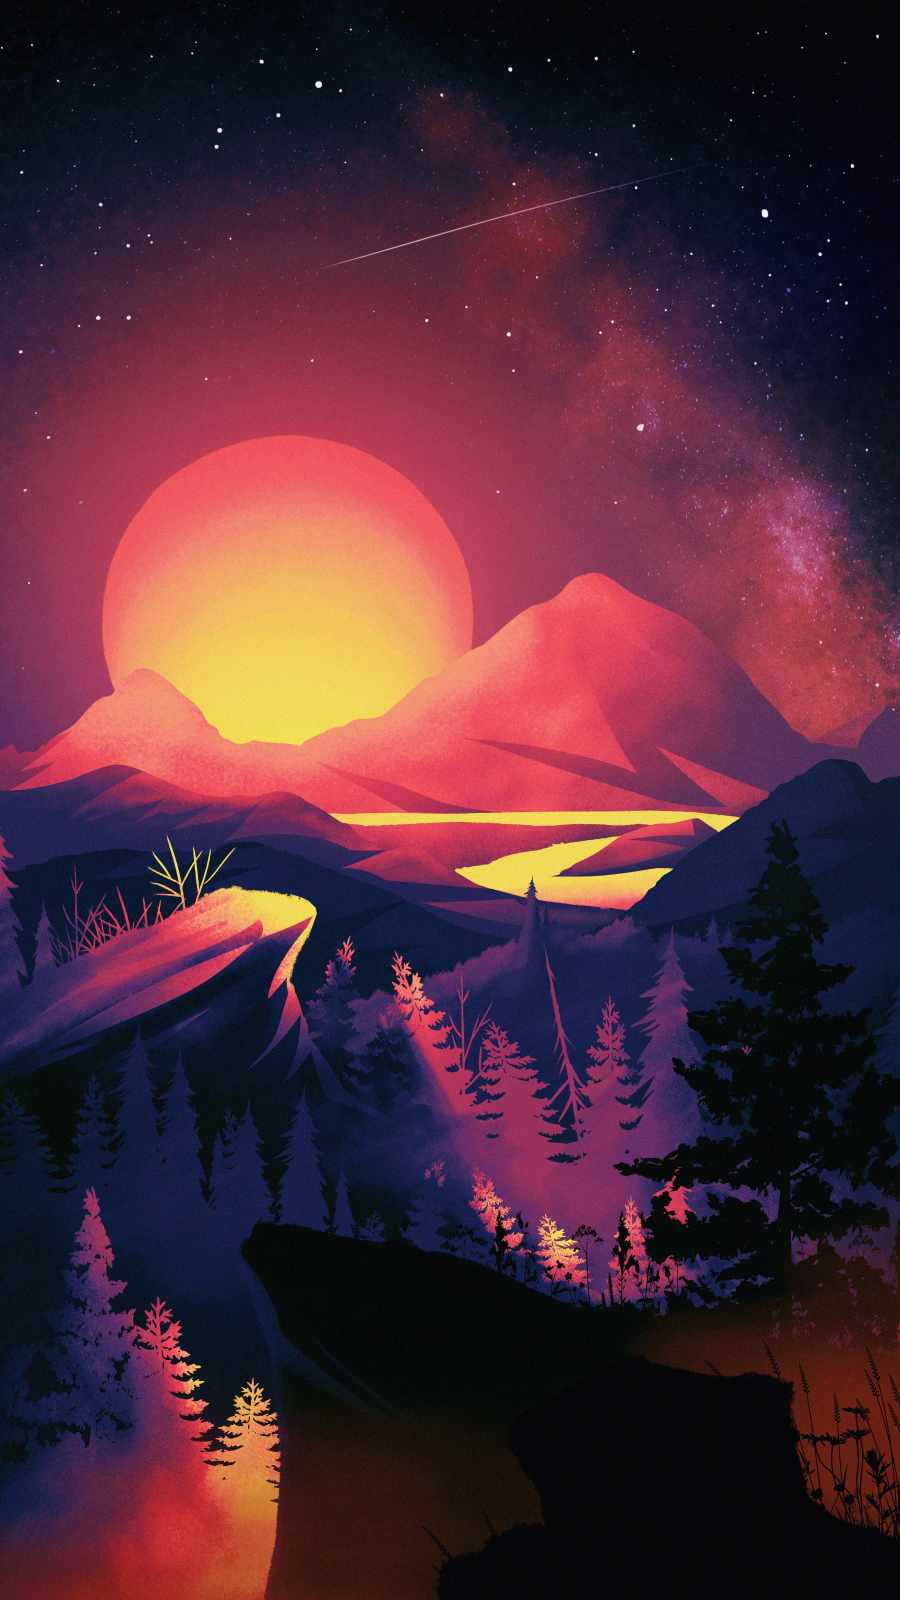 Mountain Sunrise Scenery IPhone Wallpaper  IPhone Wallpapers